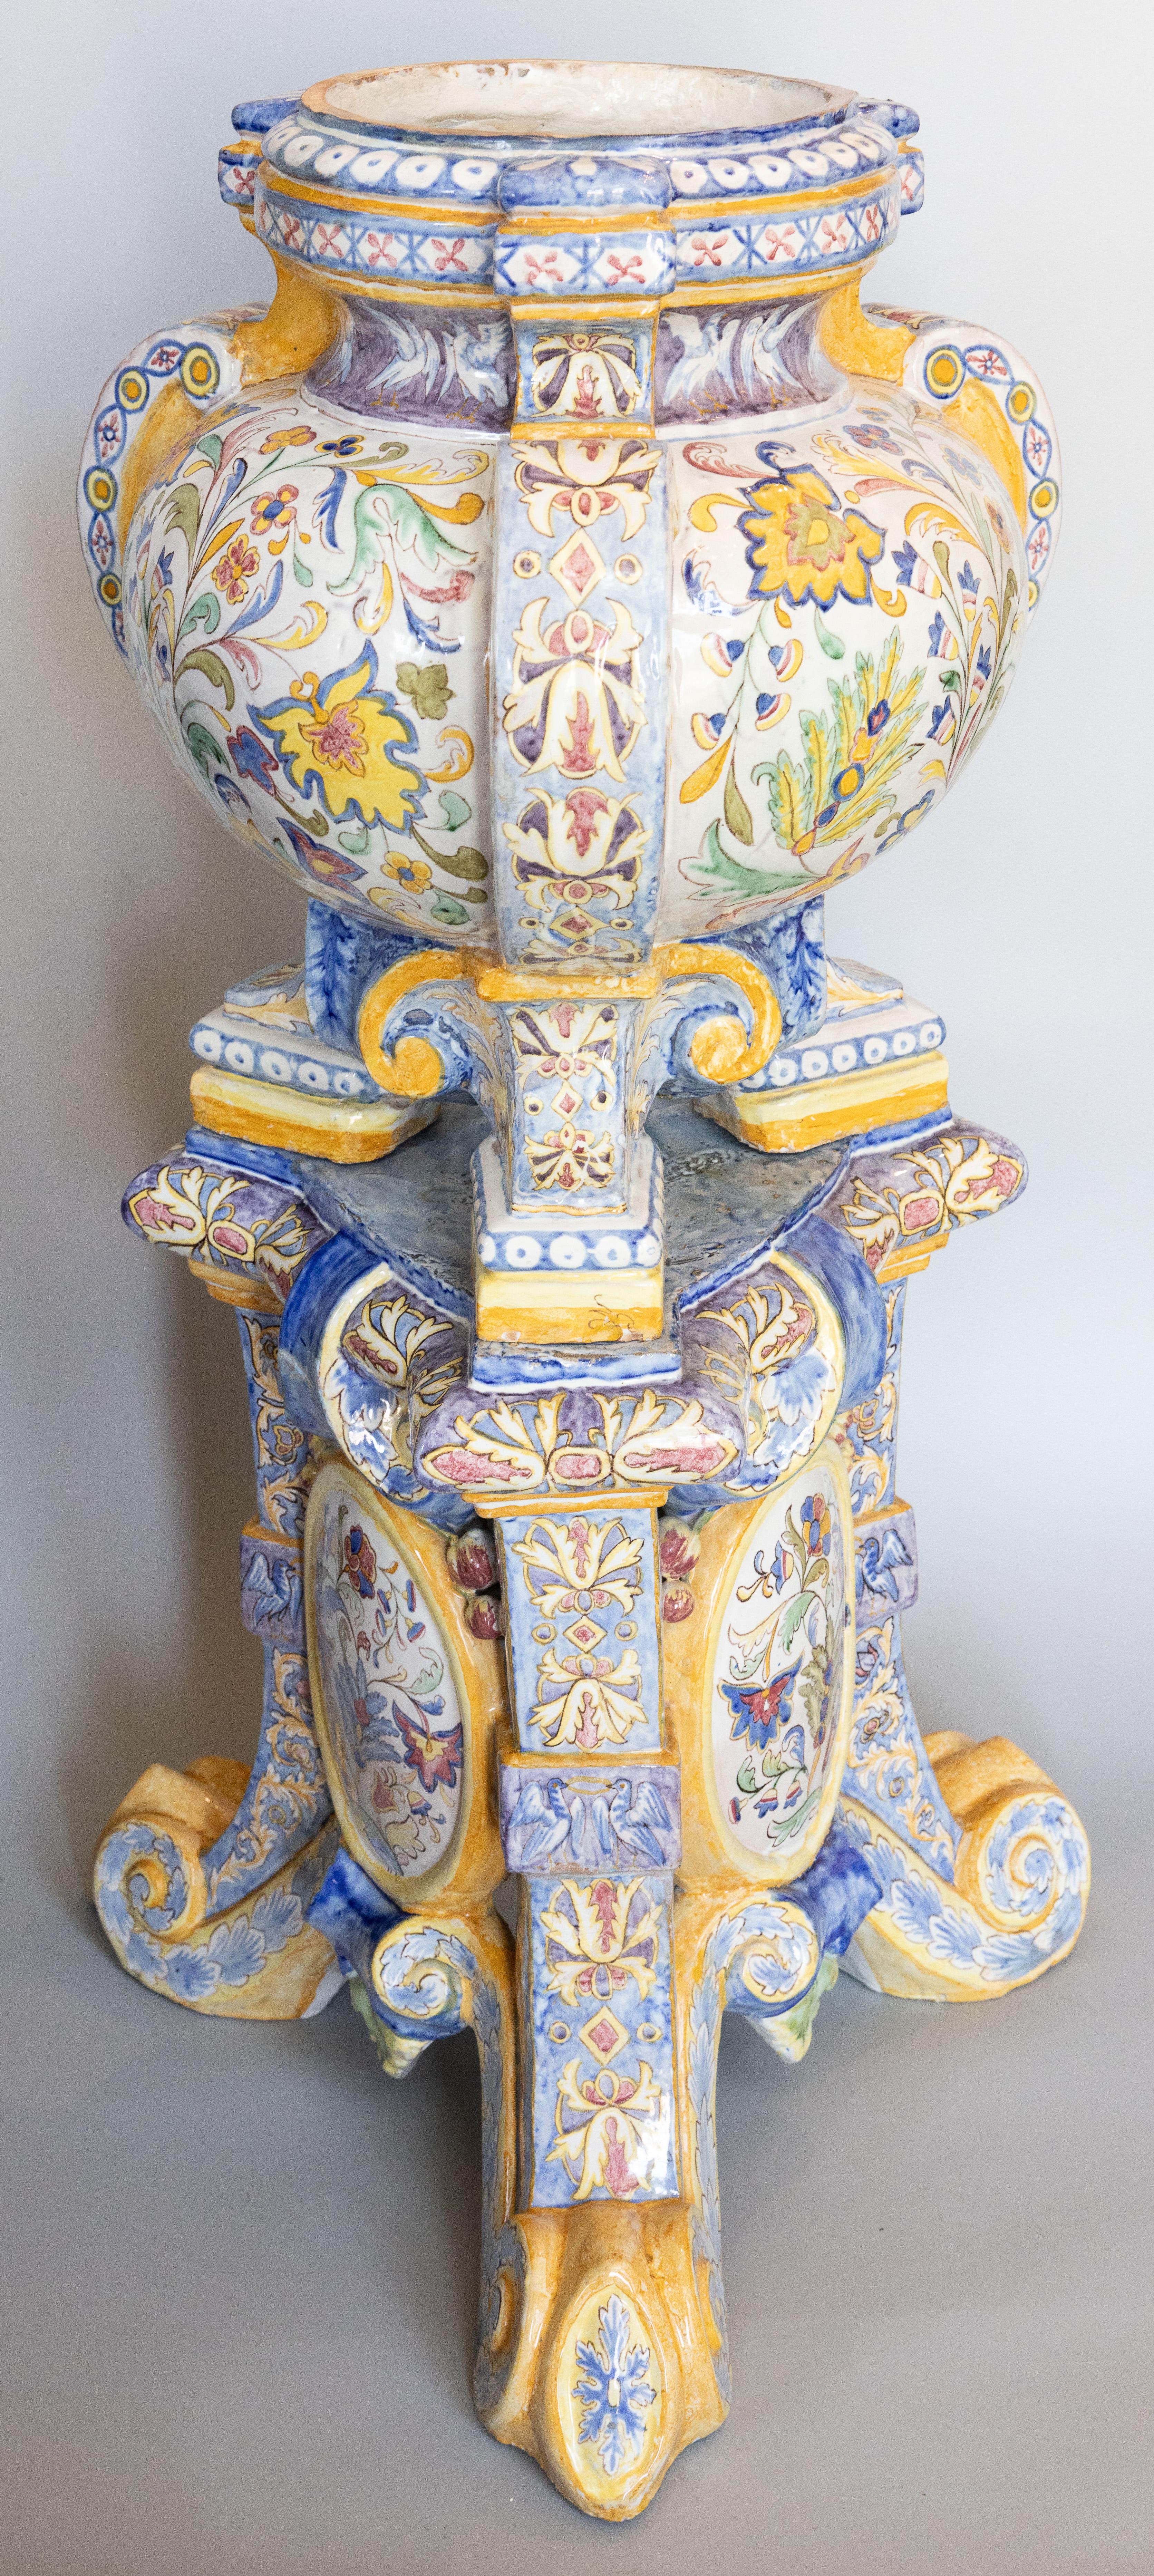 Italian Majolica jardiniere and accompanying stand in the style of Giorgio Andreoli (1470-1555). Decorated in the Renaissance style with arabesques, graffito, and floras in various polychrome colors on a white ground. The shaped jardiniere rests on